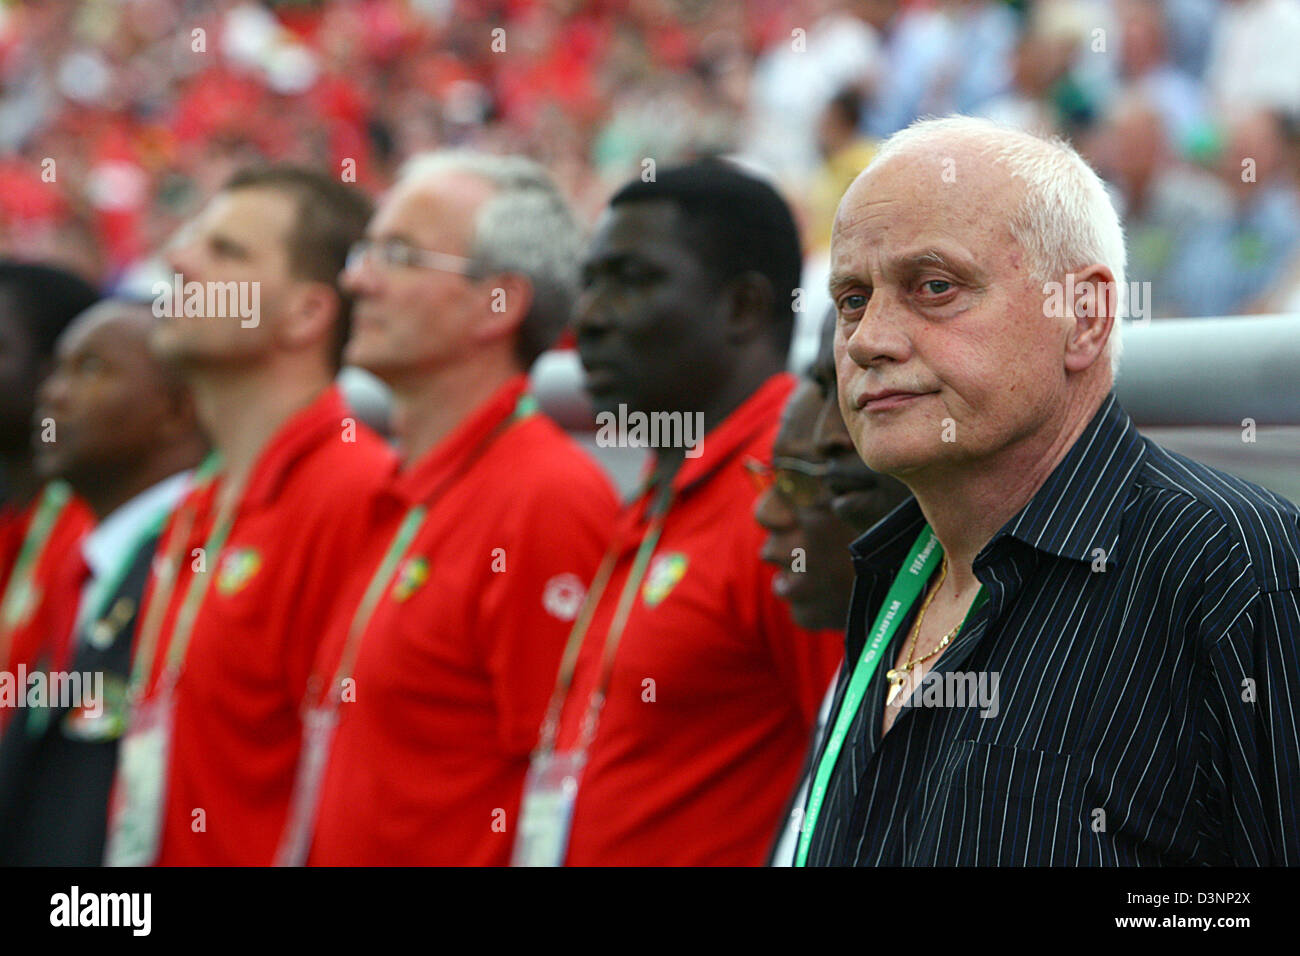 Togo national coach German Otto Pfister (R) stands in front of the bench prior to the 2006 FIFA World Cup group G match of Korea Republic vs Togo in Frankfurt, Germany, Tuesday, 13 June 2006. DPA/FELIX HEYDER +++ Mobile Services OUT +++ Please also refer to FIFA's Terms and Conditions. +++(c) dpa - Bildfunk+++ Stock Photo